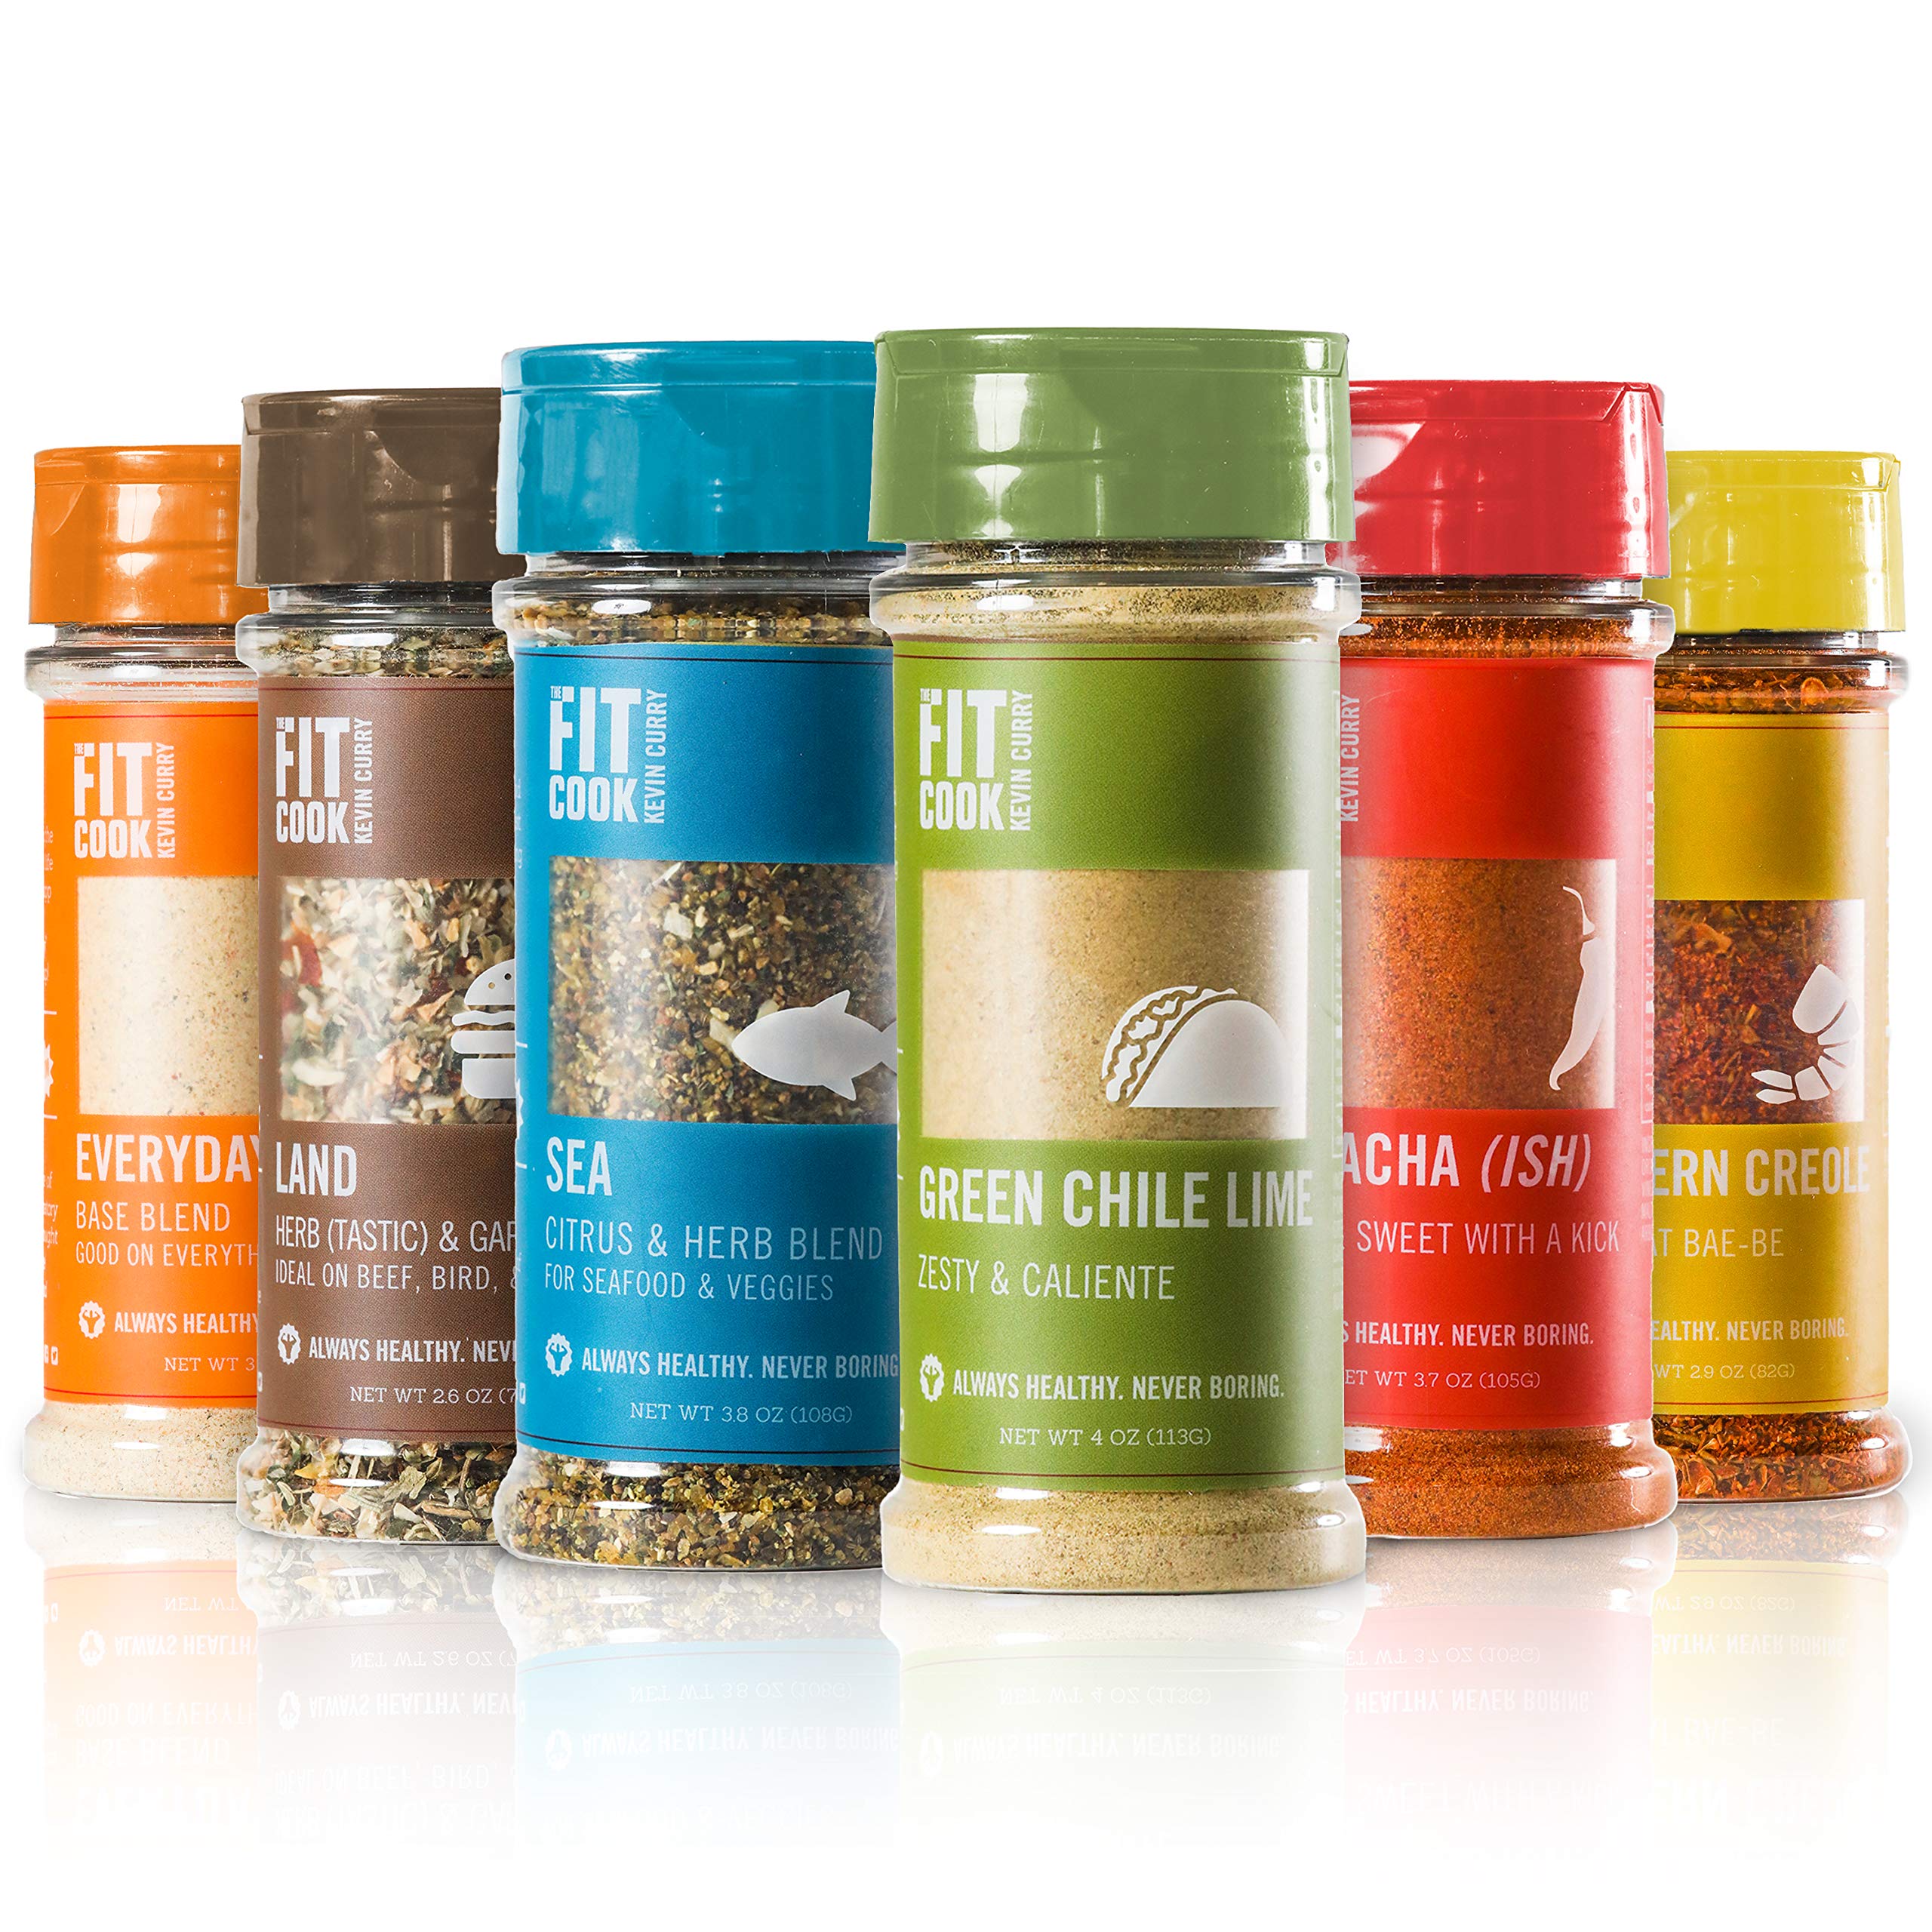 The Fit Cook Spice and Seasoning Set: Gluten Grain Free Vegan Keto Friendly Spice  Kit - 6 Health-conscious Hand-Crafted Seasoning Gift Set for Men Dads -  Perfect for Grilling BBQ and Foodies